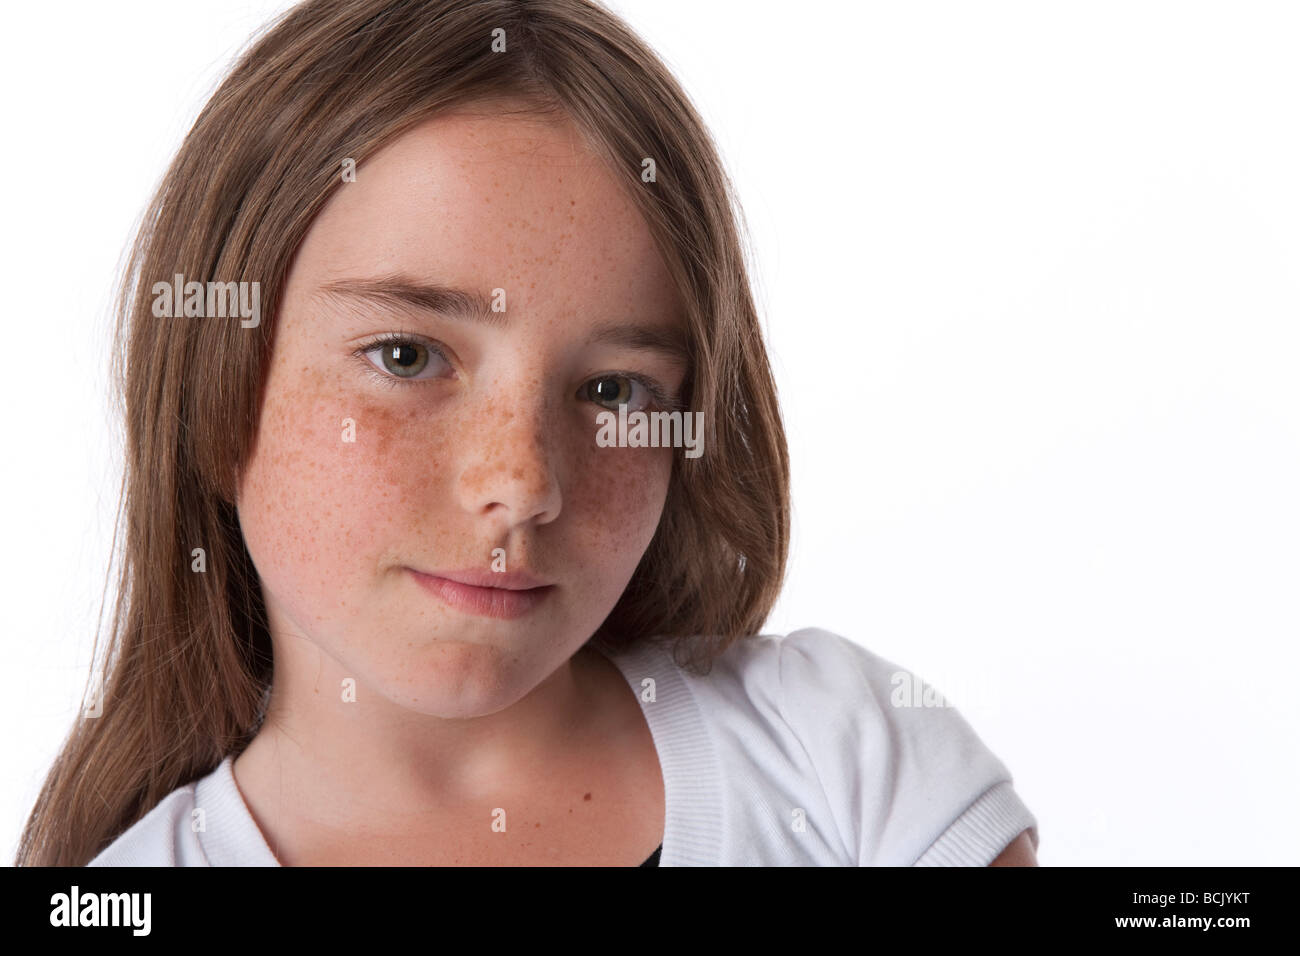 Portrait of a cool 10 year old girl Stock Photo